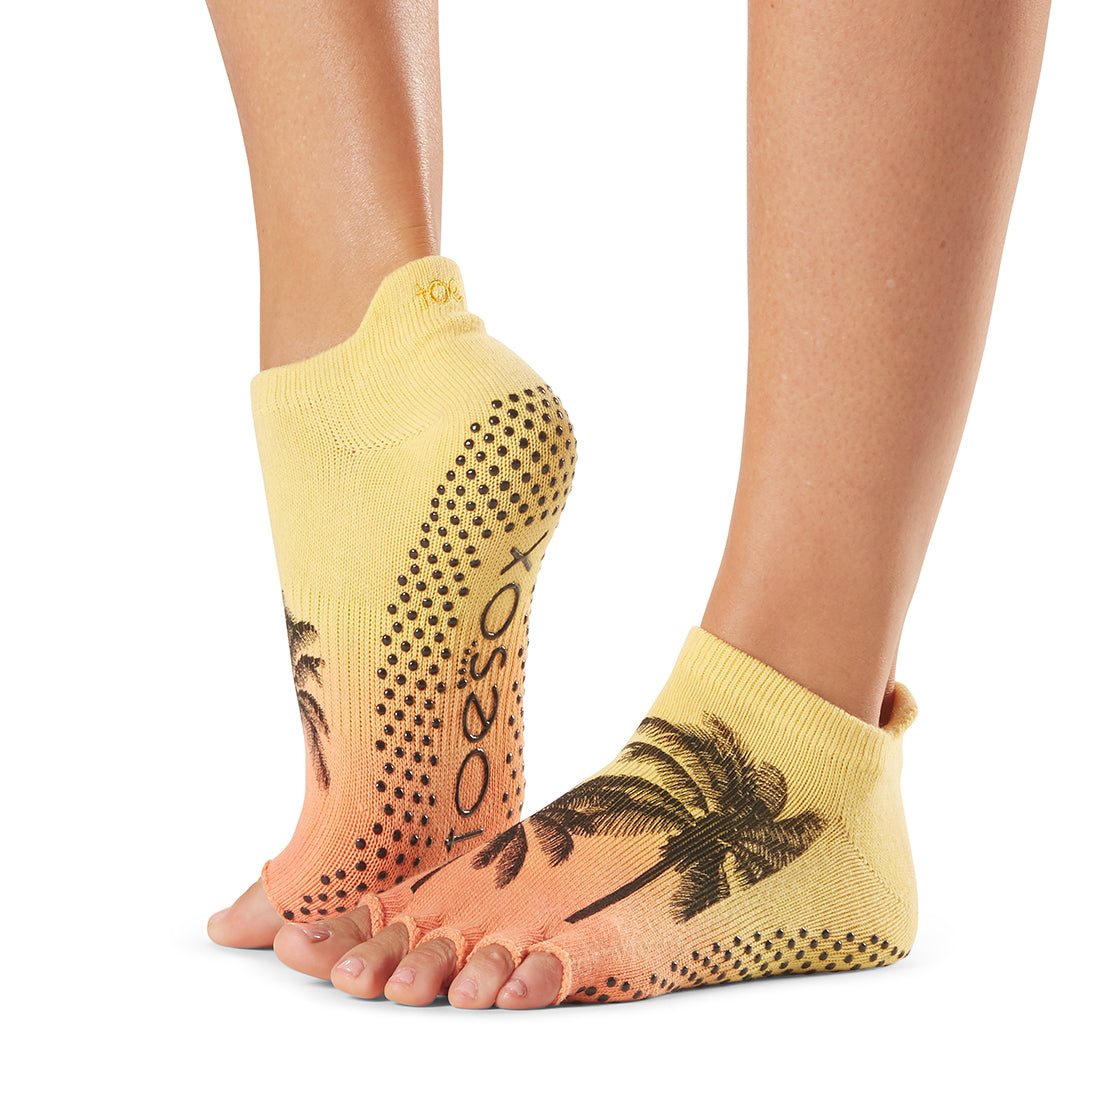 ToeSox - Low Rise Grip Socks - SPRING 2020 - T8 Fitness - Asia